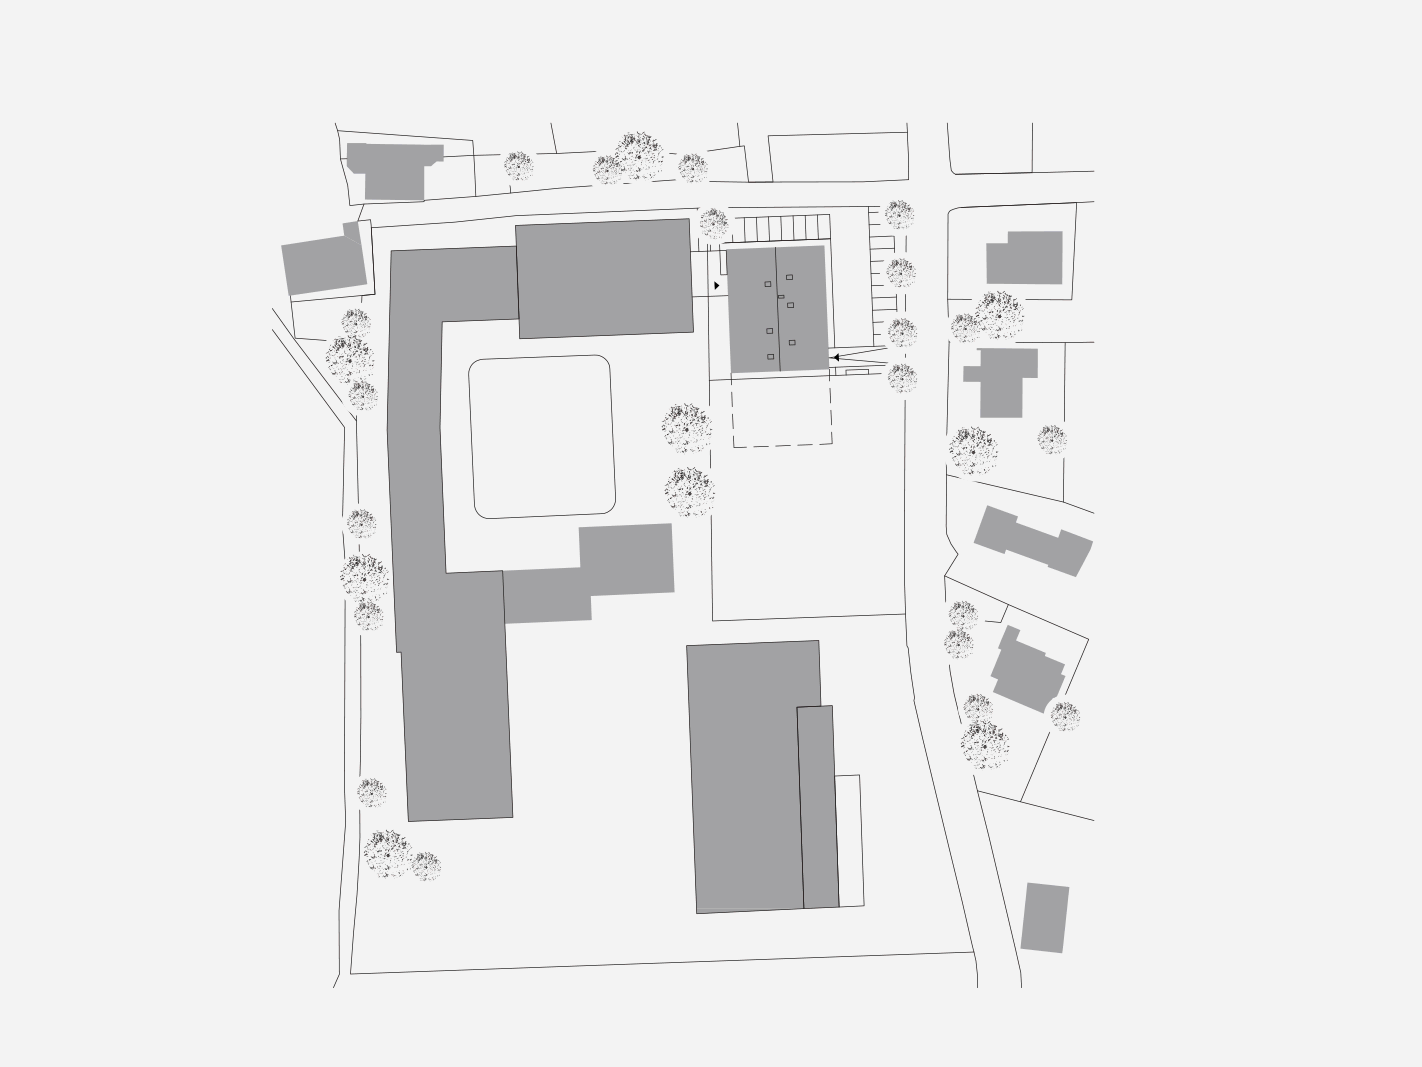 A sketch of the entire area of the agricultural centre in Maishofen. 